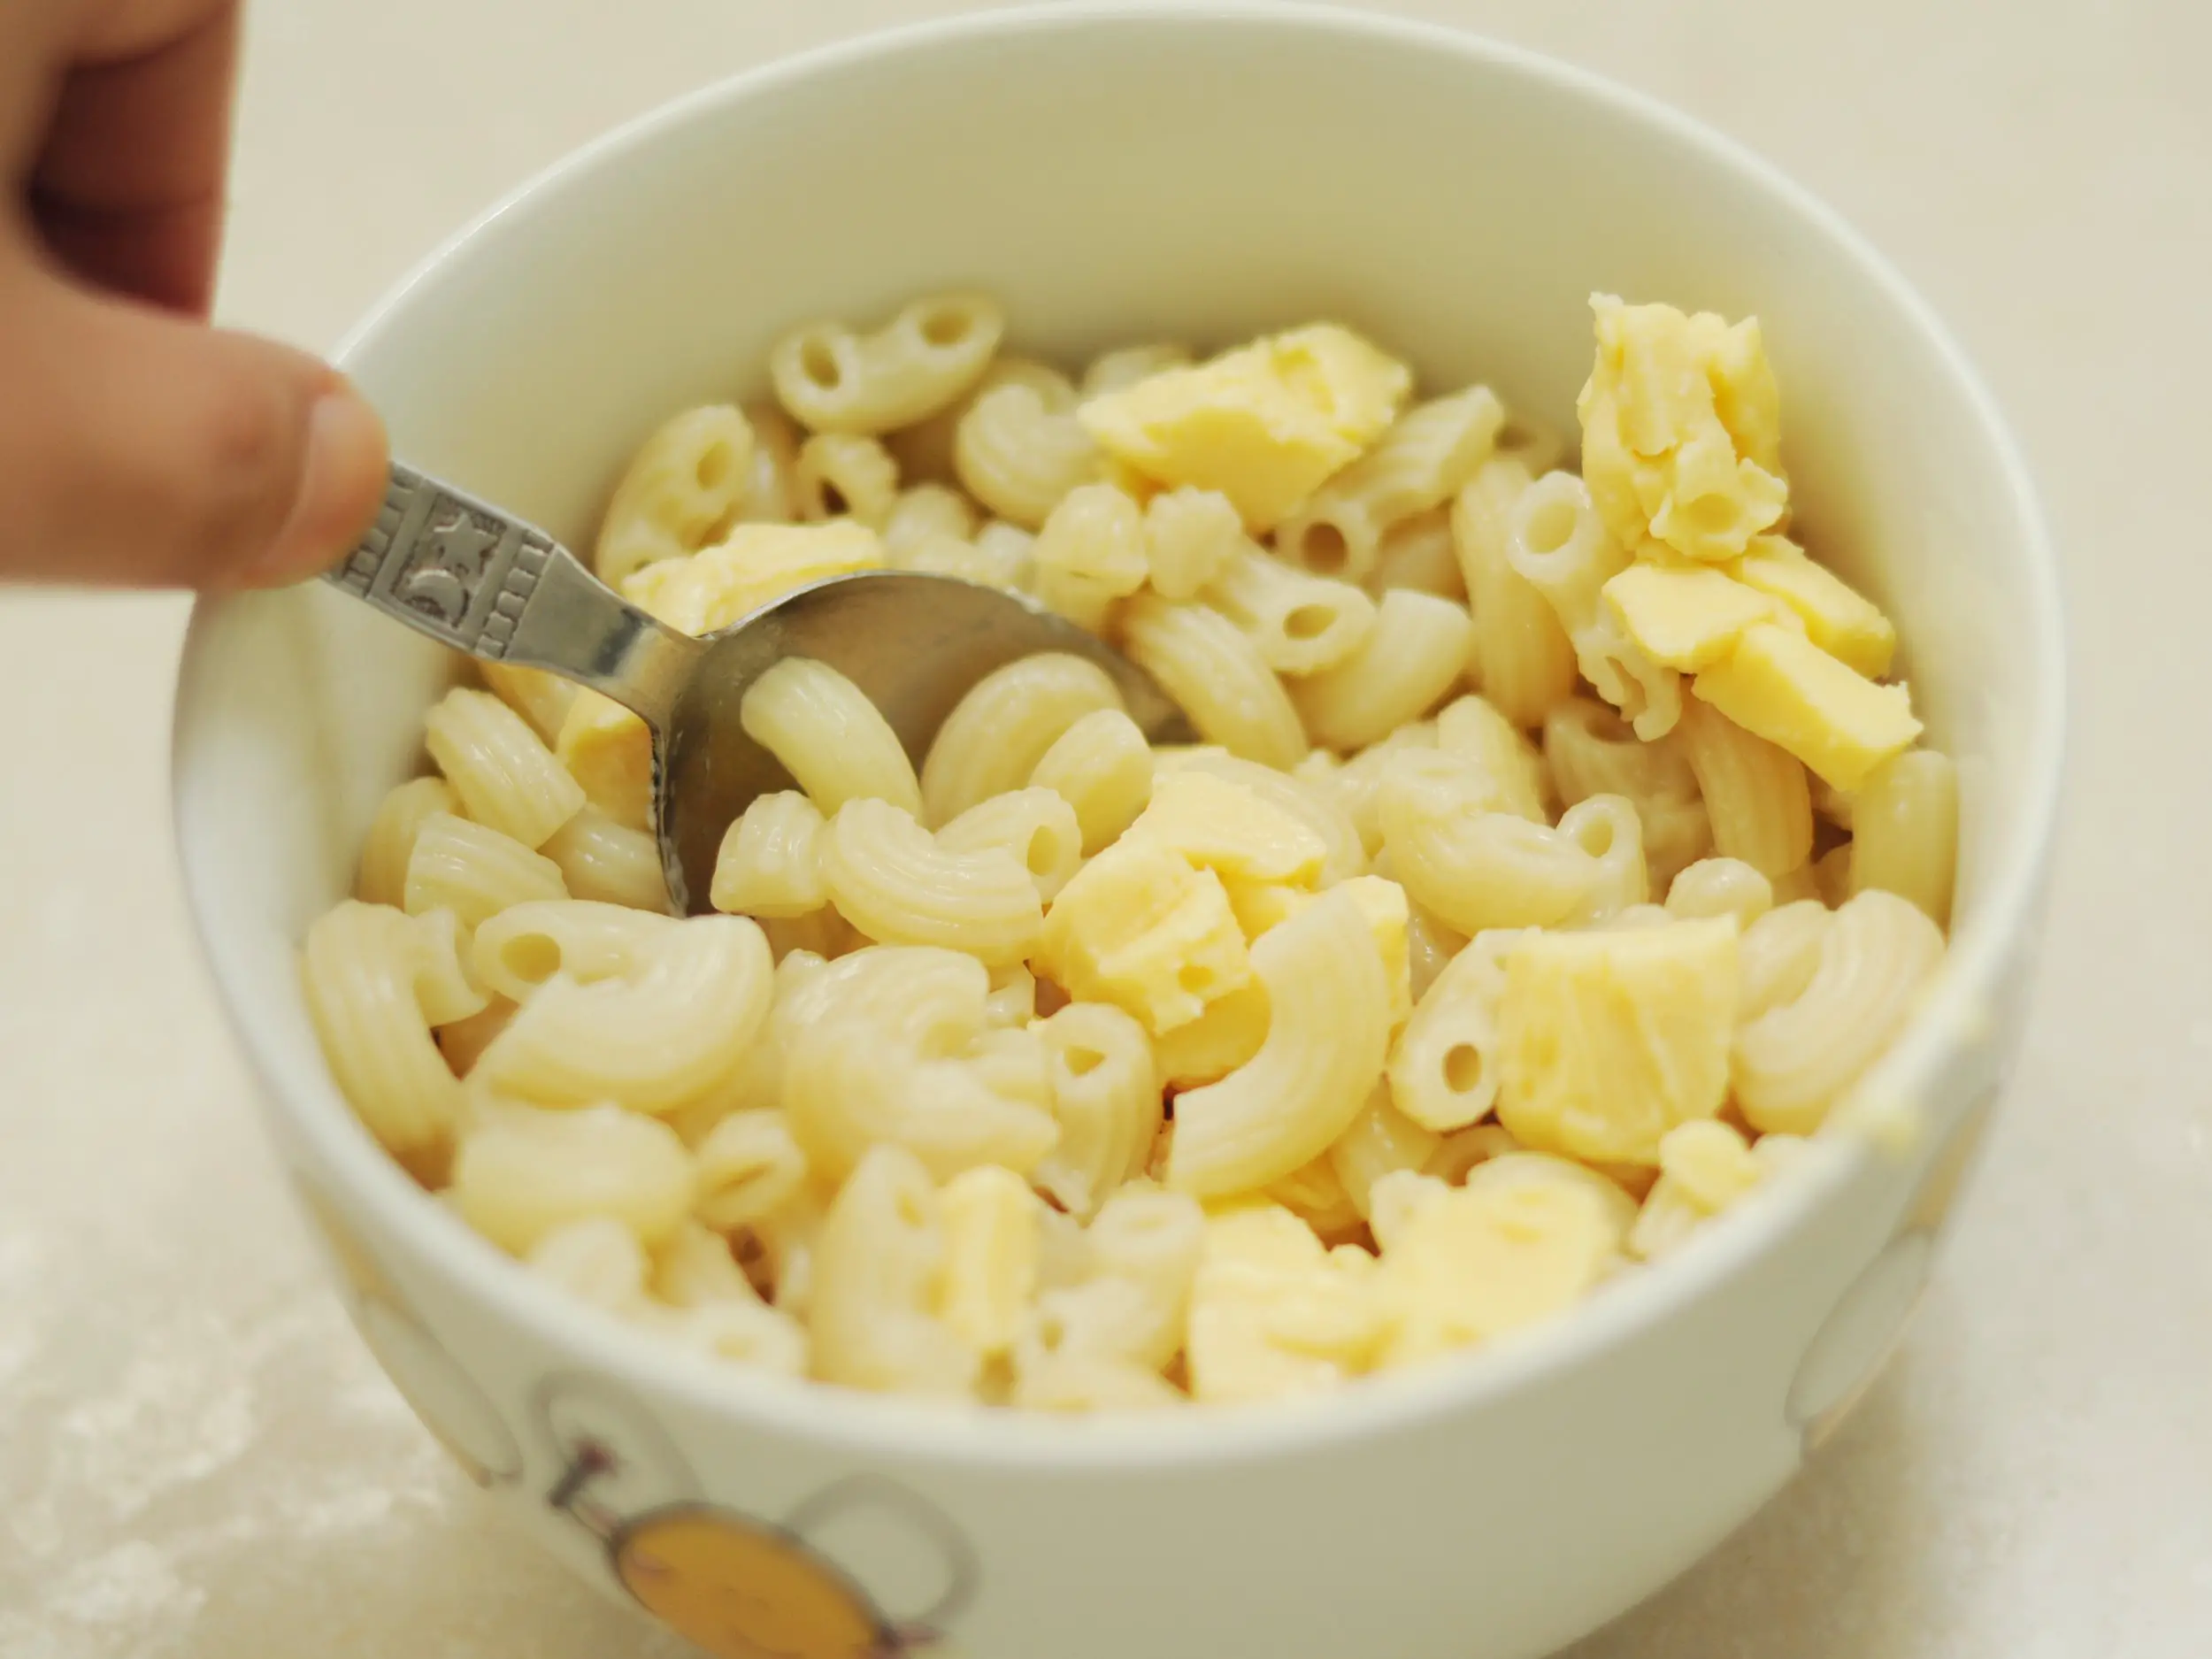 How to Make Microwaved Macaroni and Cheese Taste Better: 7 Steps